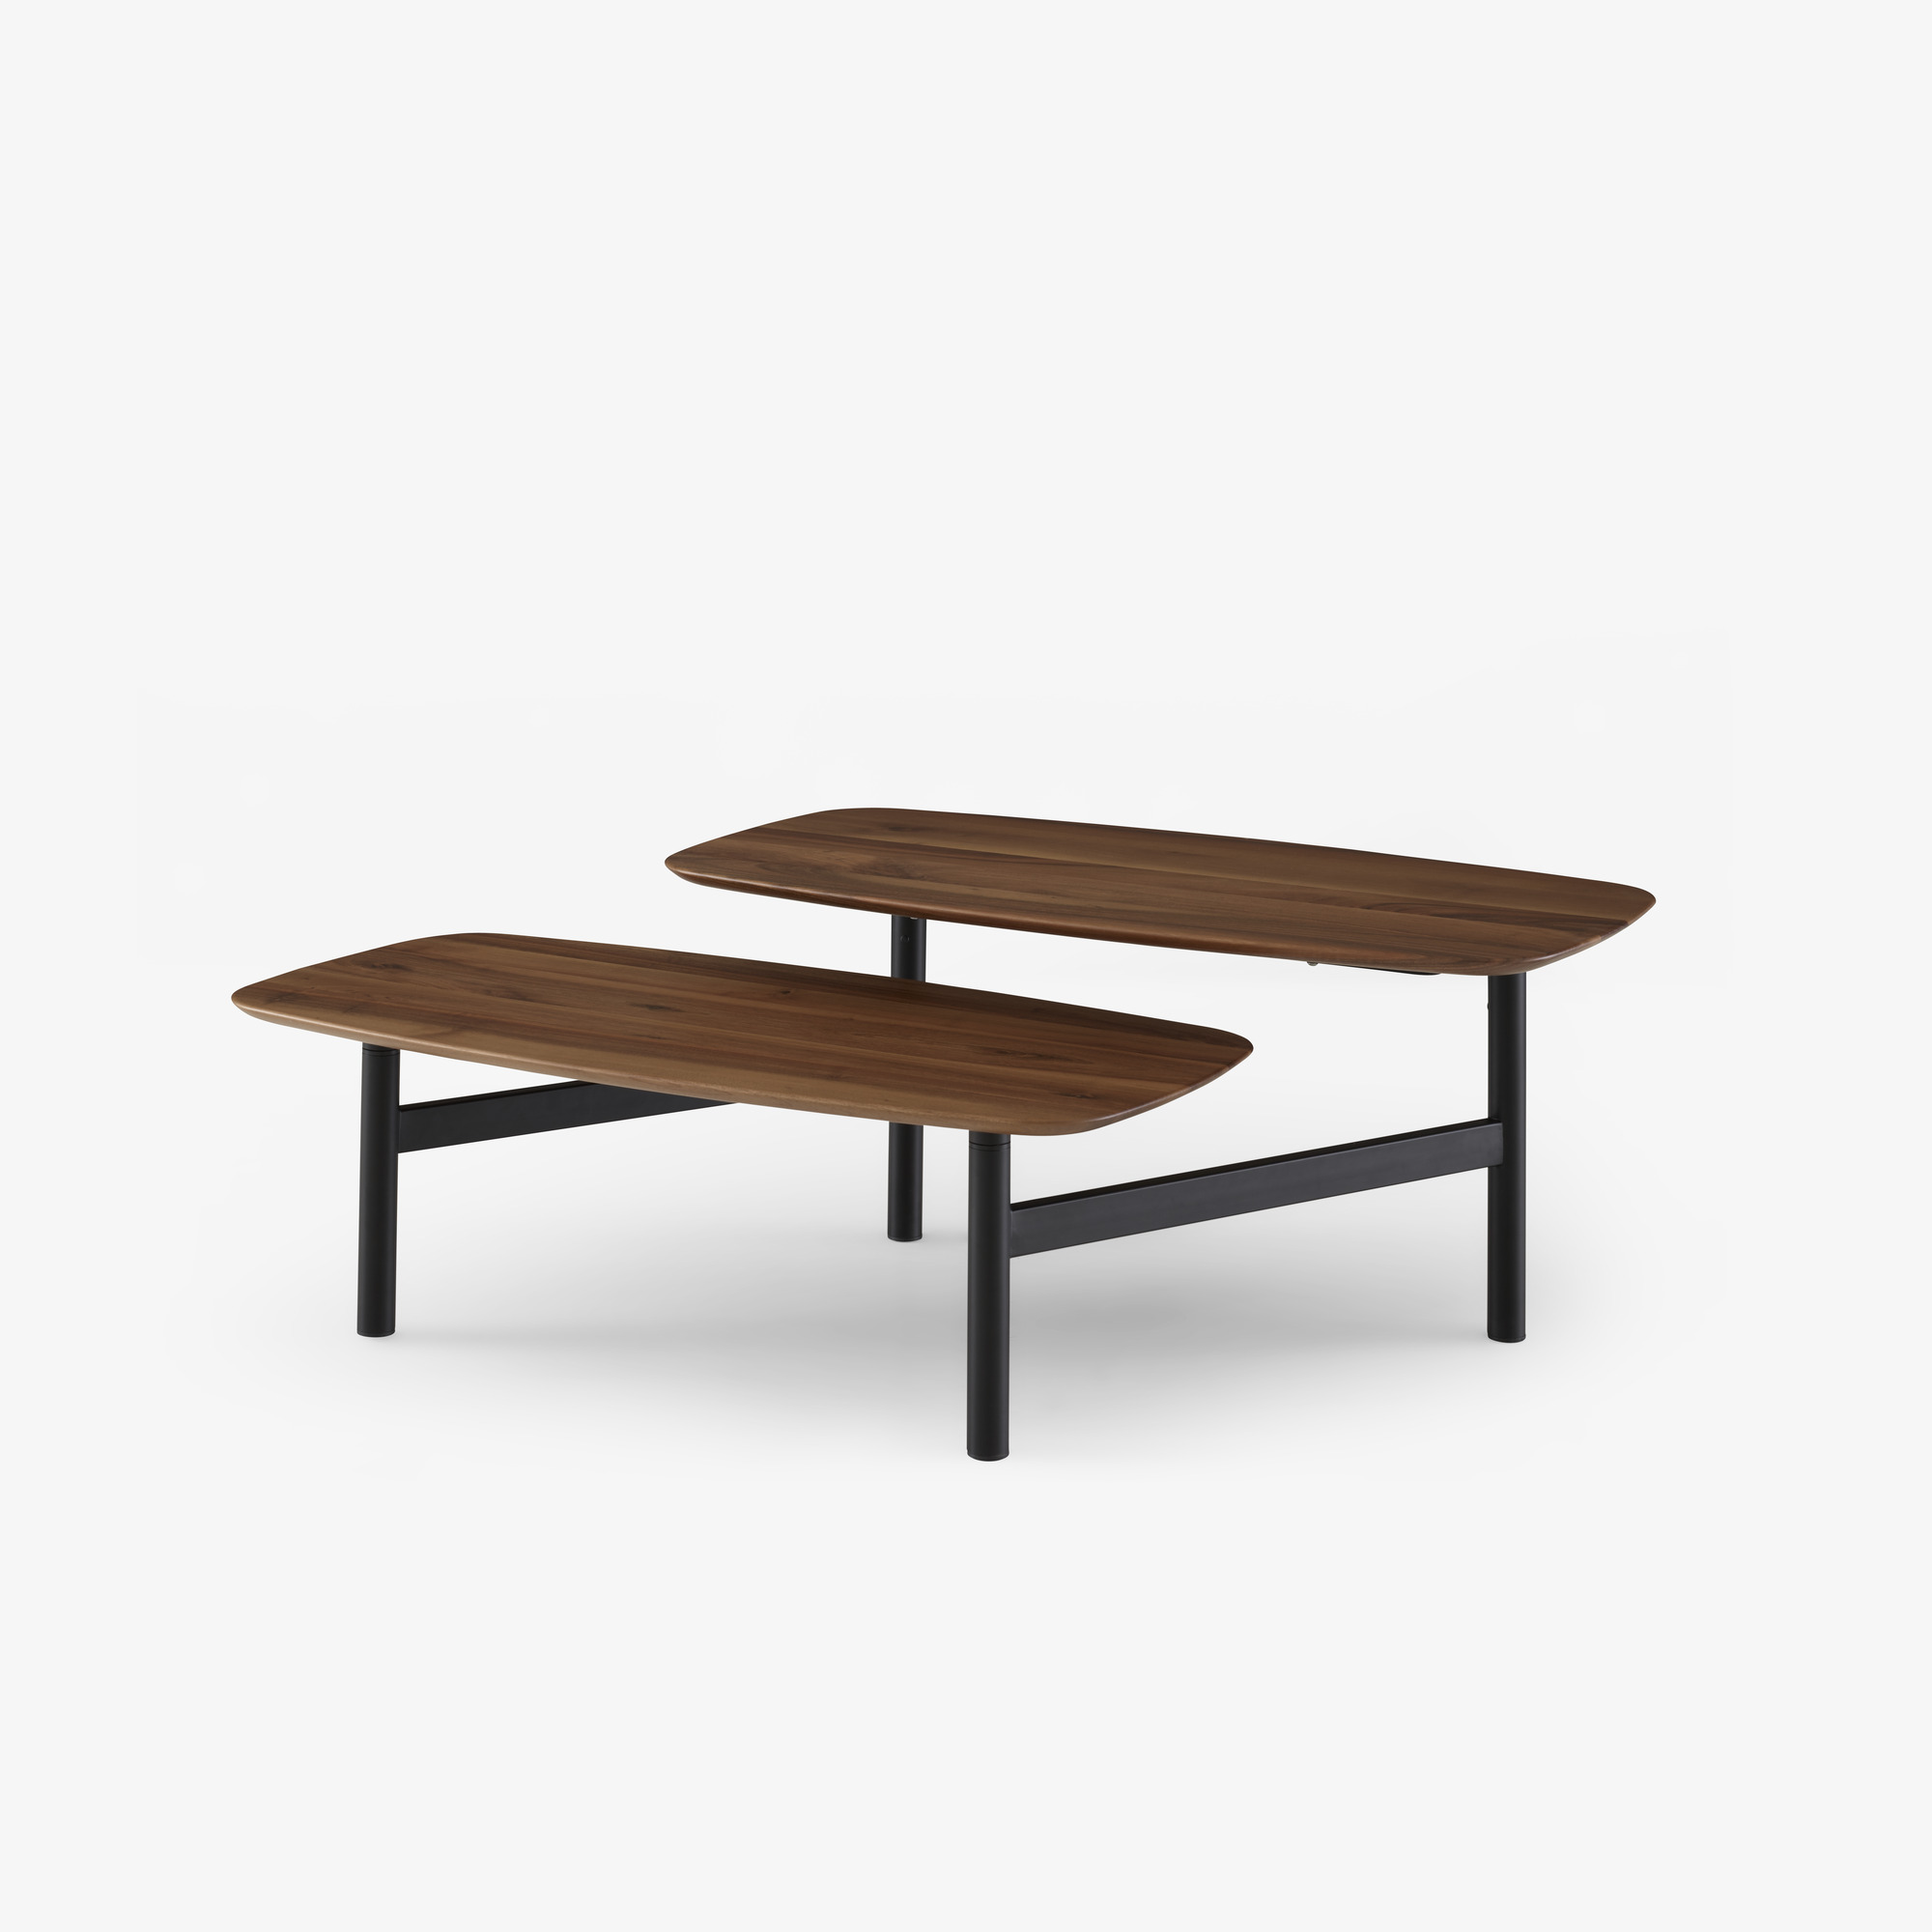 Image Low table european walnut top black lacquered base 3